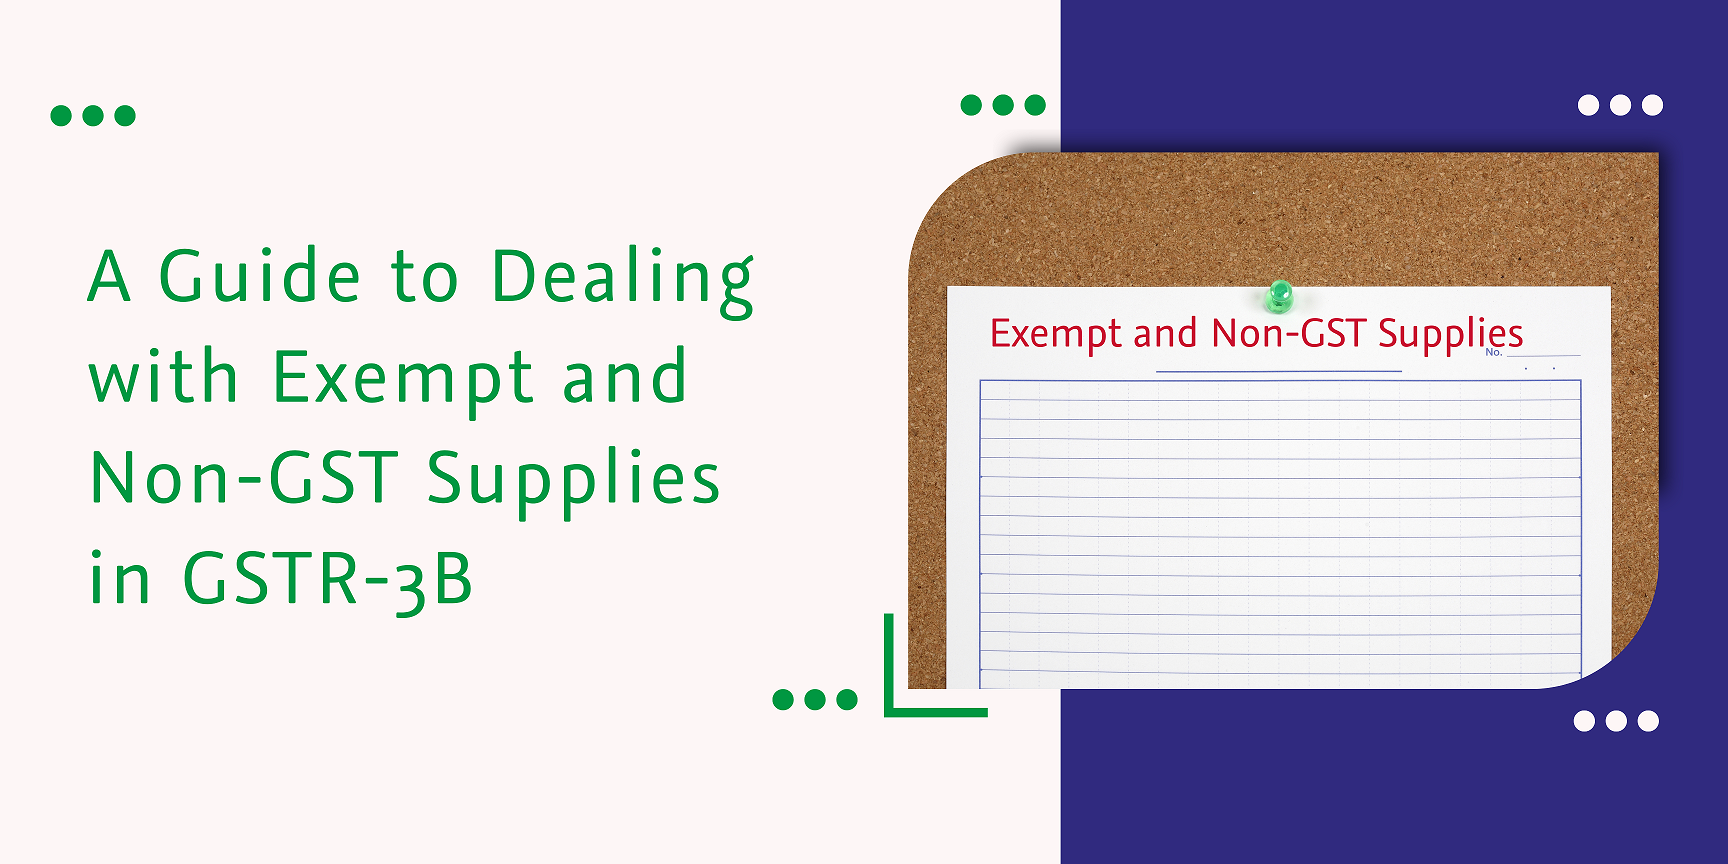 a guide to dealing with exempt and non-gst supplies in gstr-3b